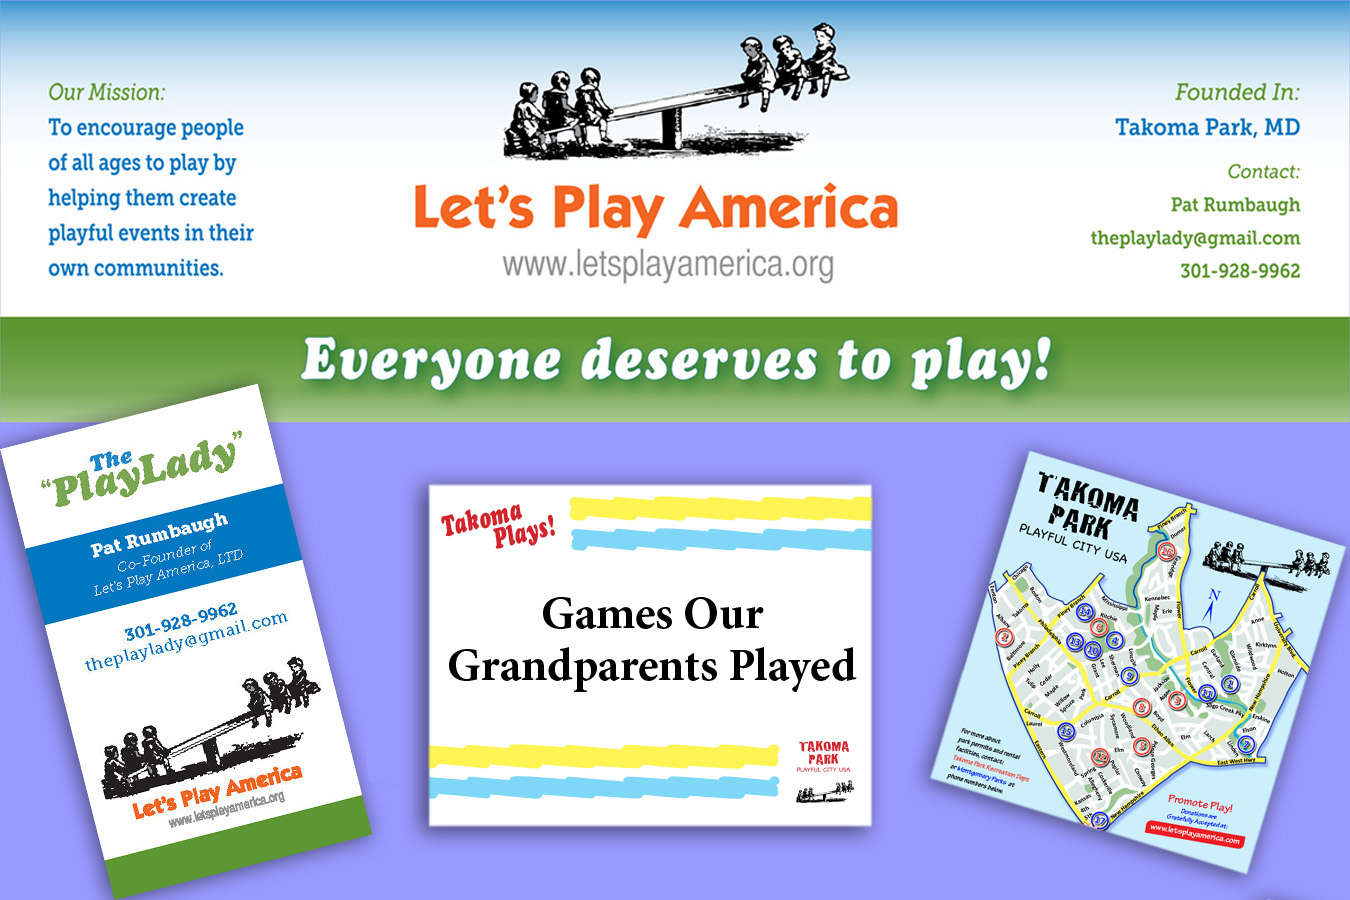 TKPLAYS signs : 3D Branding for Let's Play America encourages local community to get outside and play!